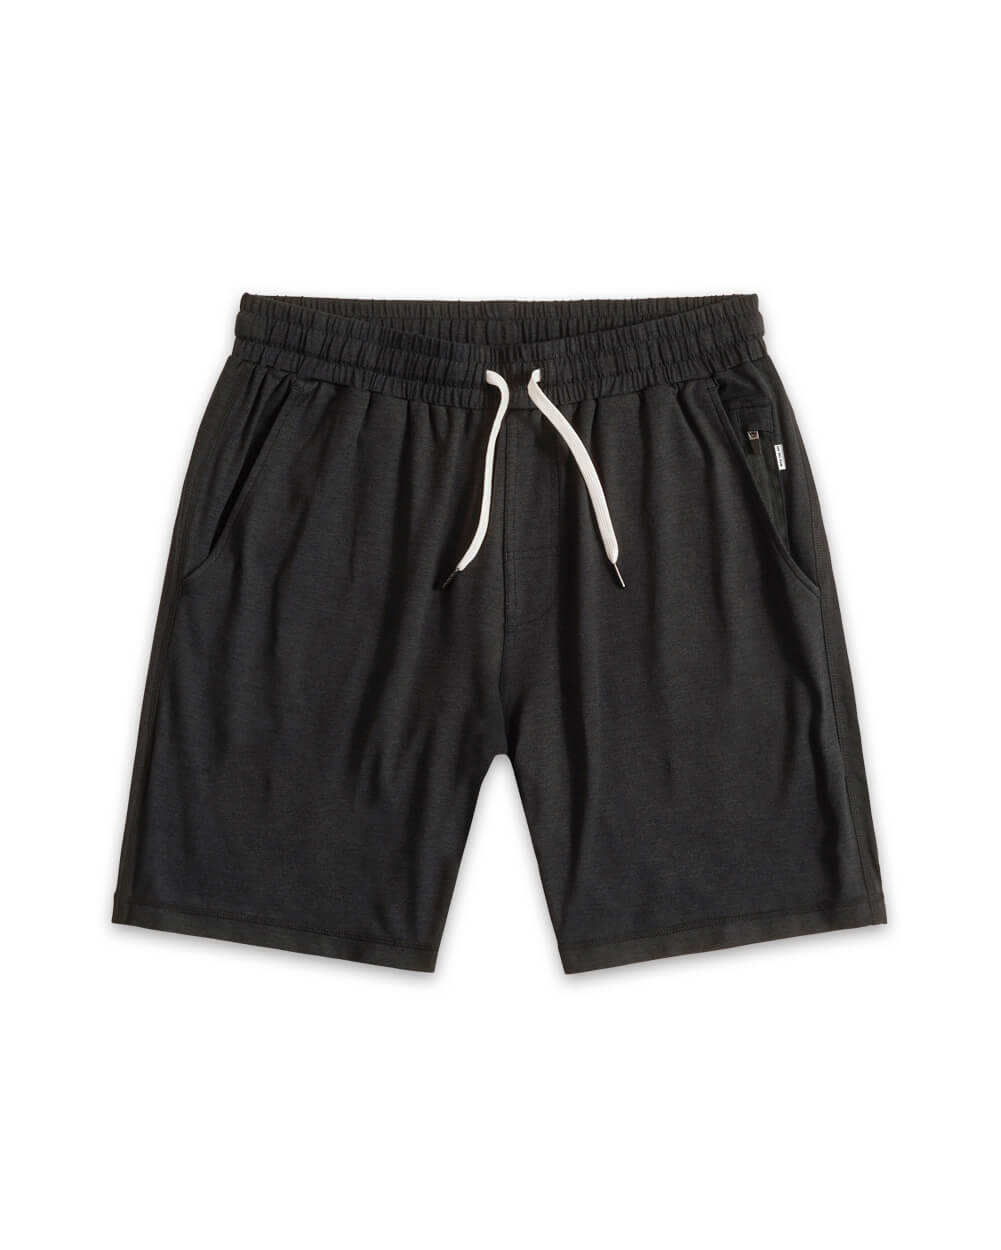 Essential Comfort Shorts-Charcoal-Front